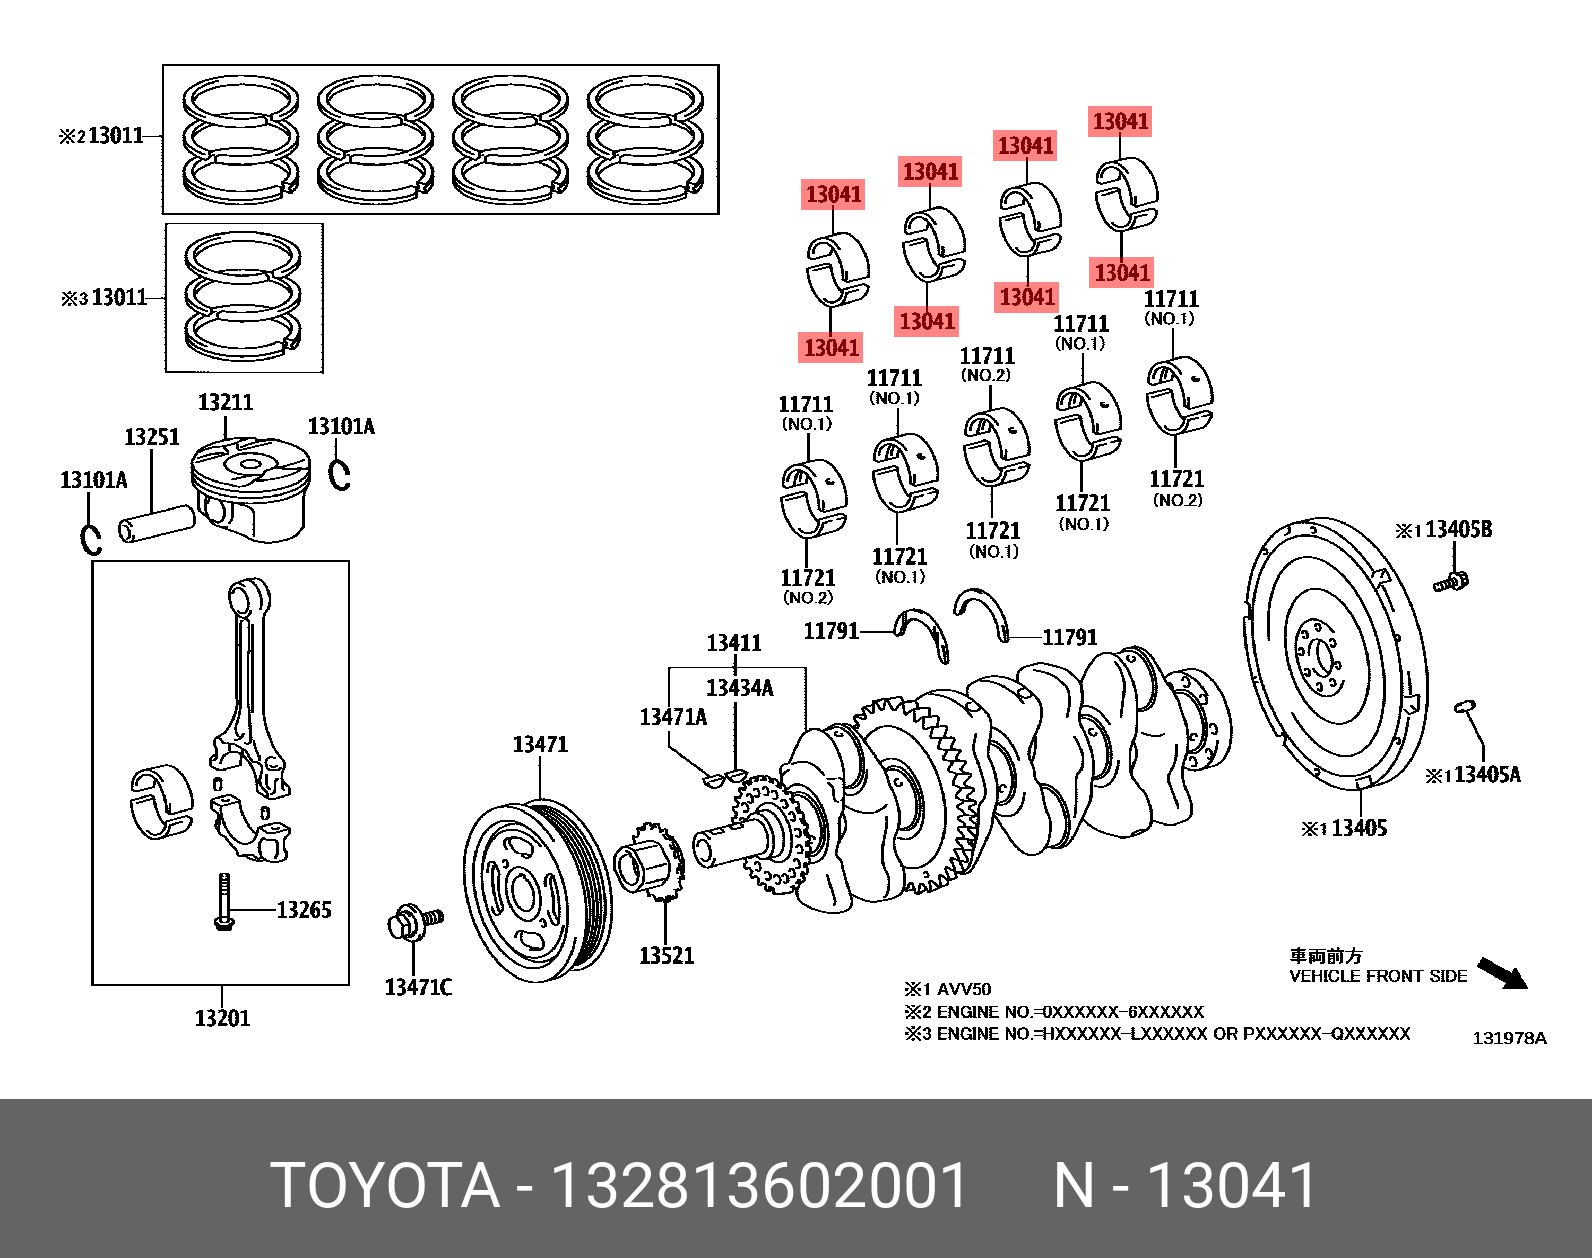 CAMRY HYBRID 201108 - 201704, BEARING, CONNECTING ROD